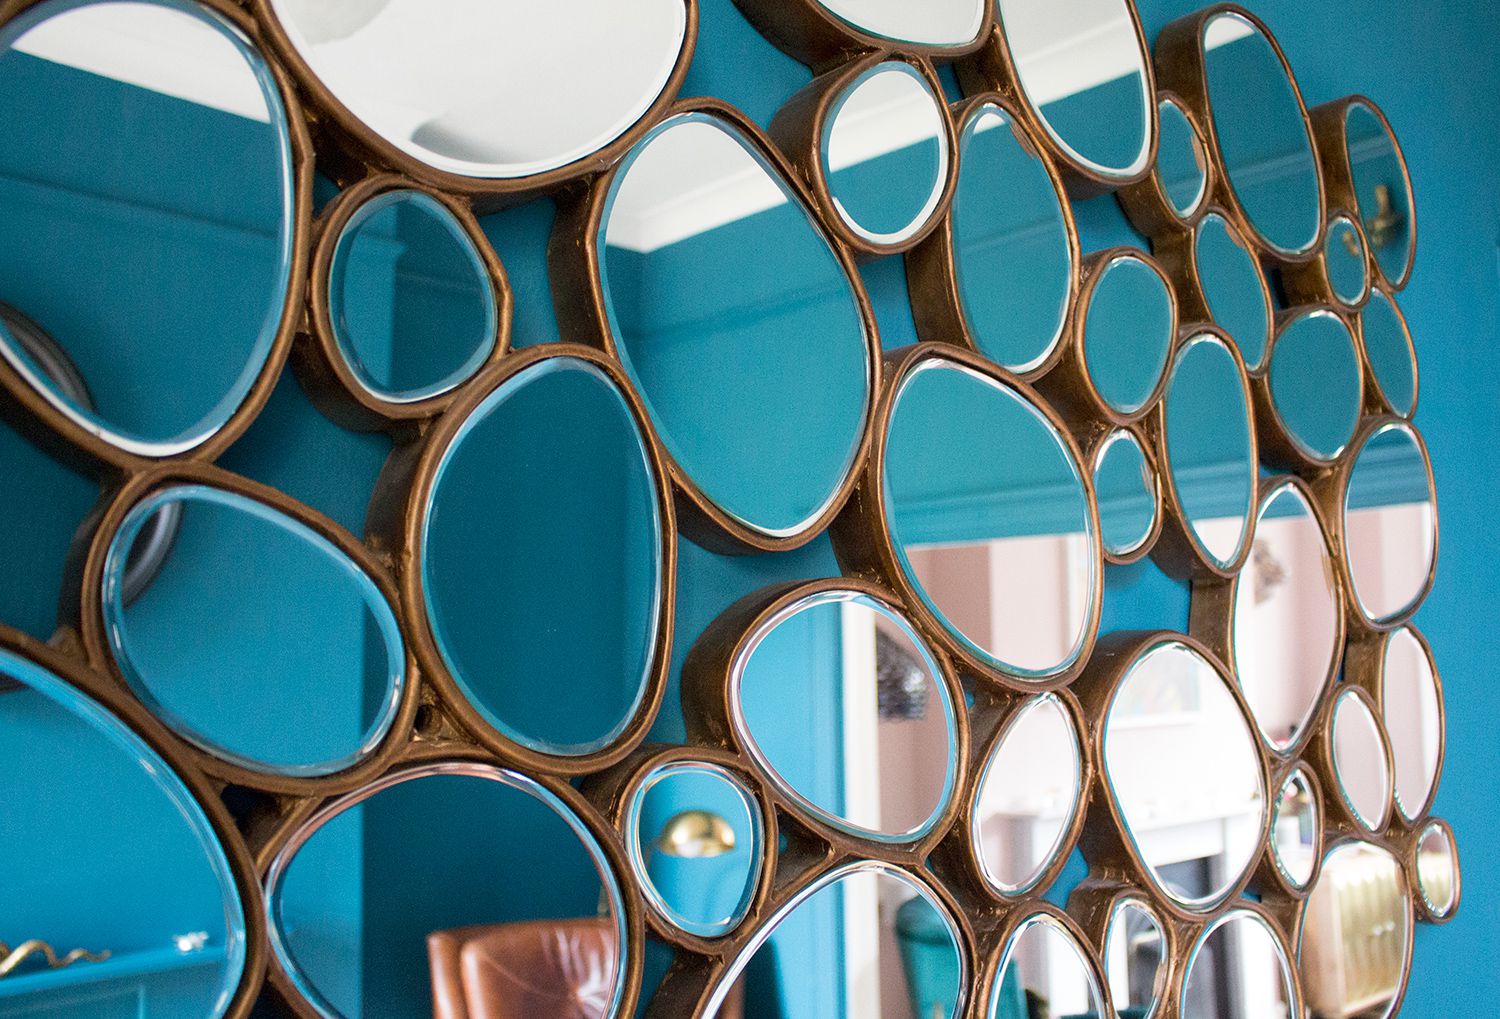 A close up photo of a brass mirror made up of circles in the teal room.